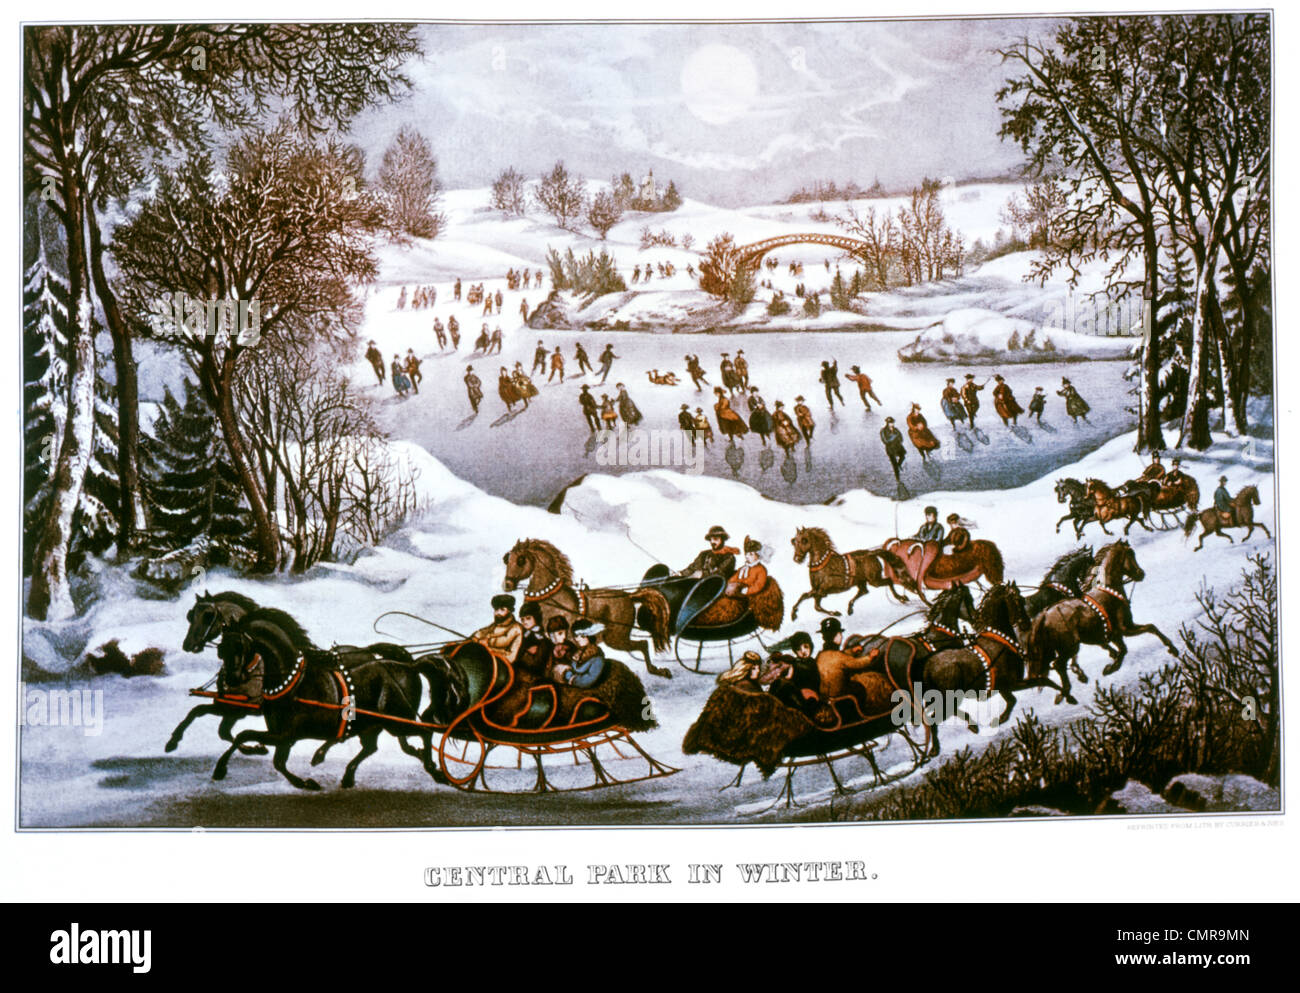 1800s 1860s CENTRAL PARK WINTER SCENE NEW YORK CITY PEOPLE ICE SKATING HORSE AND SLEIGH CURRIER & IVES LITHOGRAPH Stock Photo